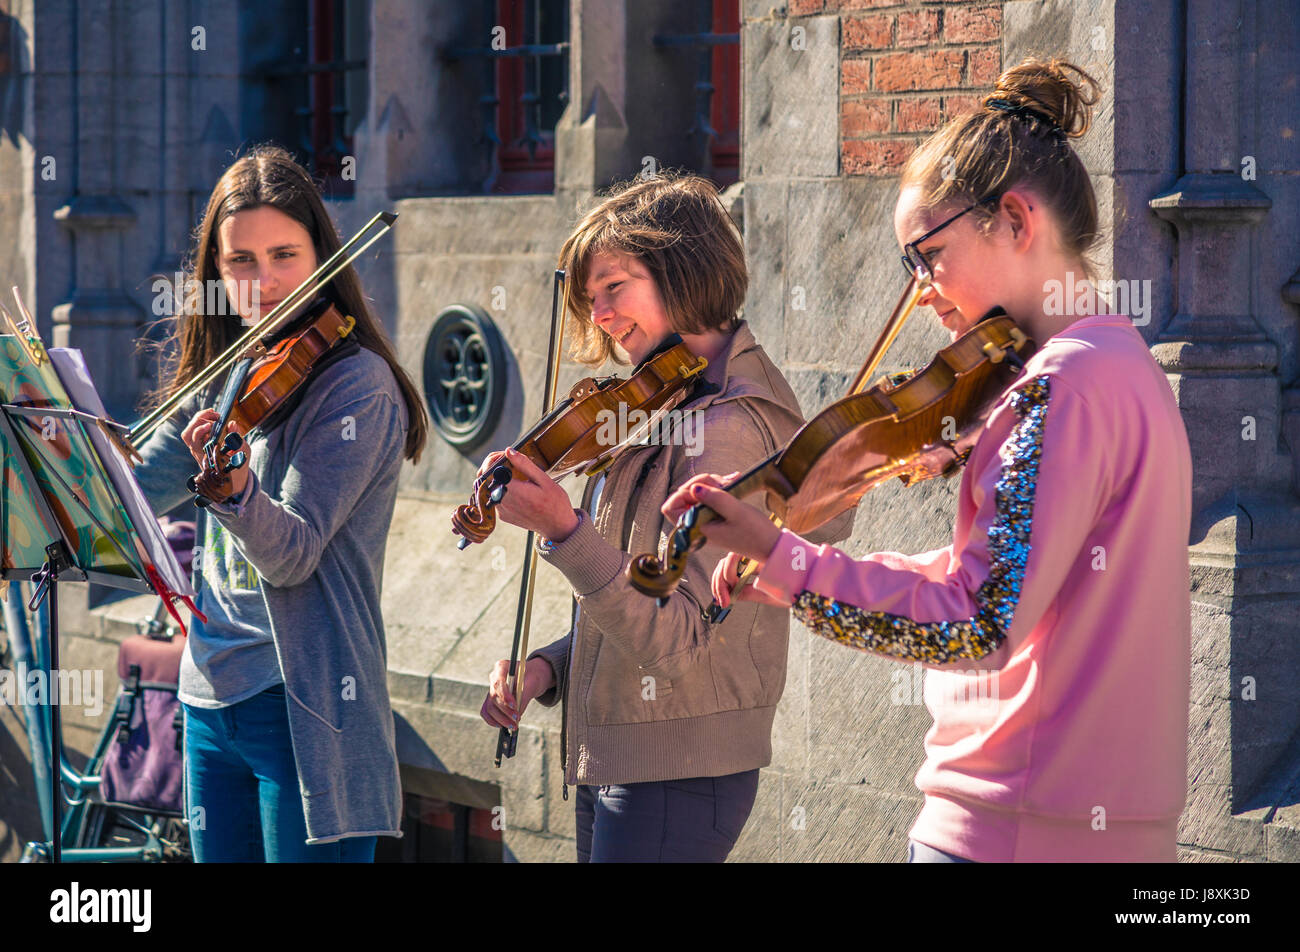 Bruges, Belgium - 11 April 2017 - Three female teen violinists play for donation on a street of Bruges, Belgium on April 11, 2017 Stock Photo